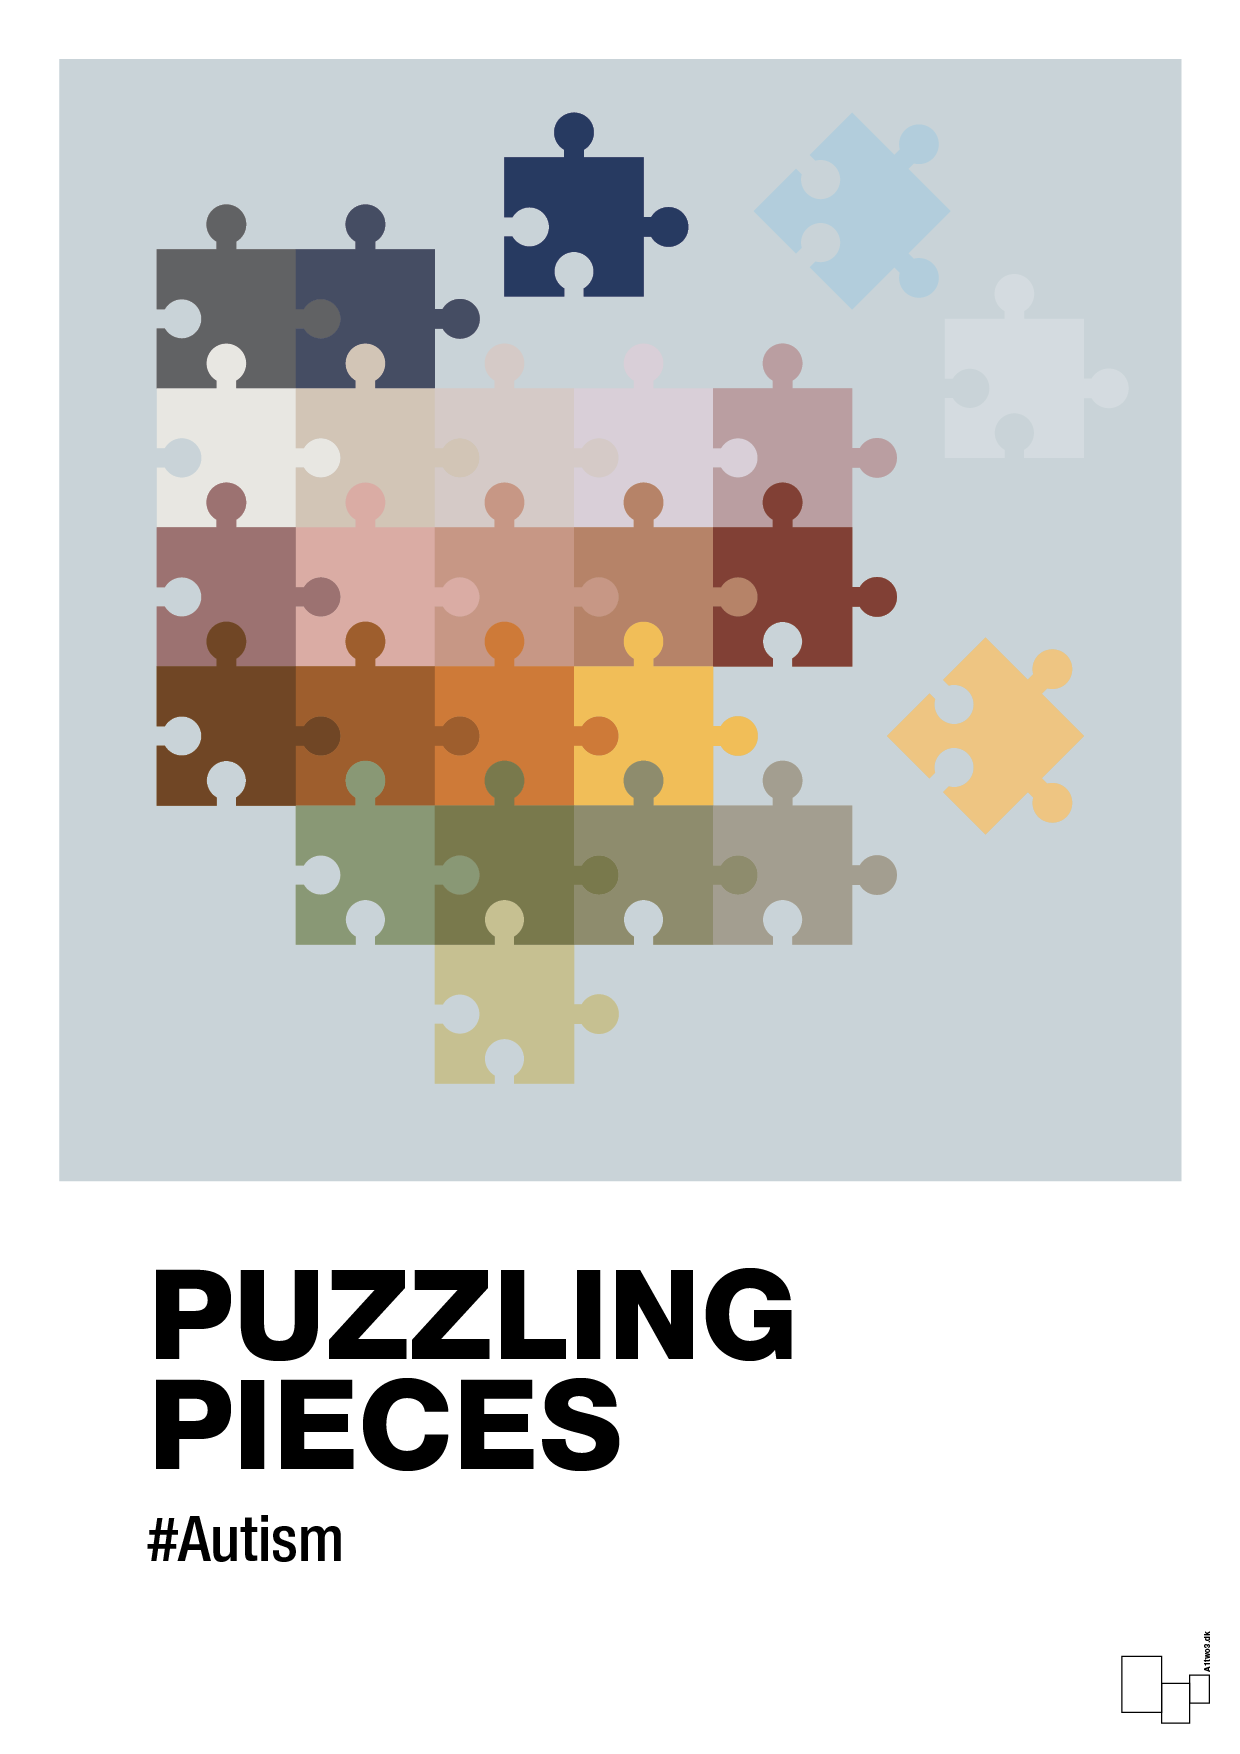 puzzling pieces - Plakat med Samfund i Light Drizzle